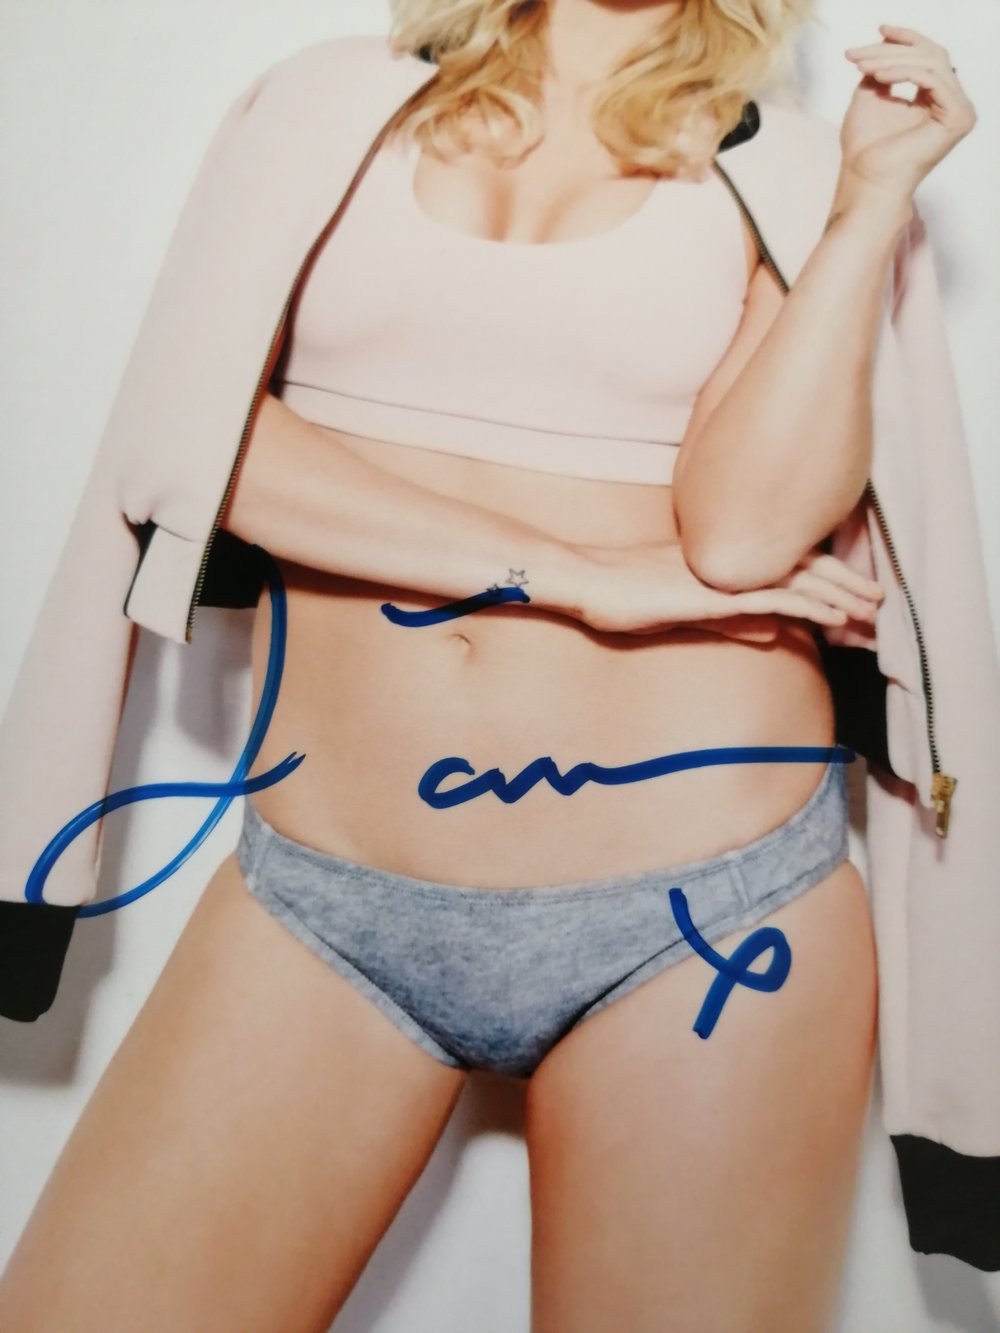 Model Laura Whitmore Signed sexy 10x8